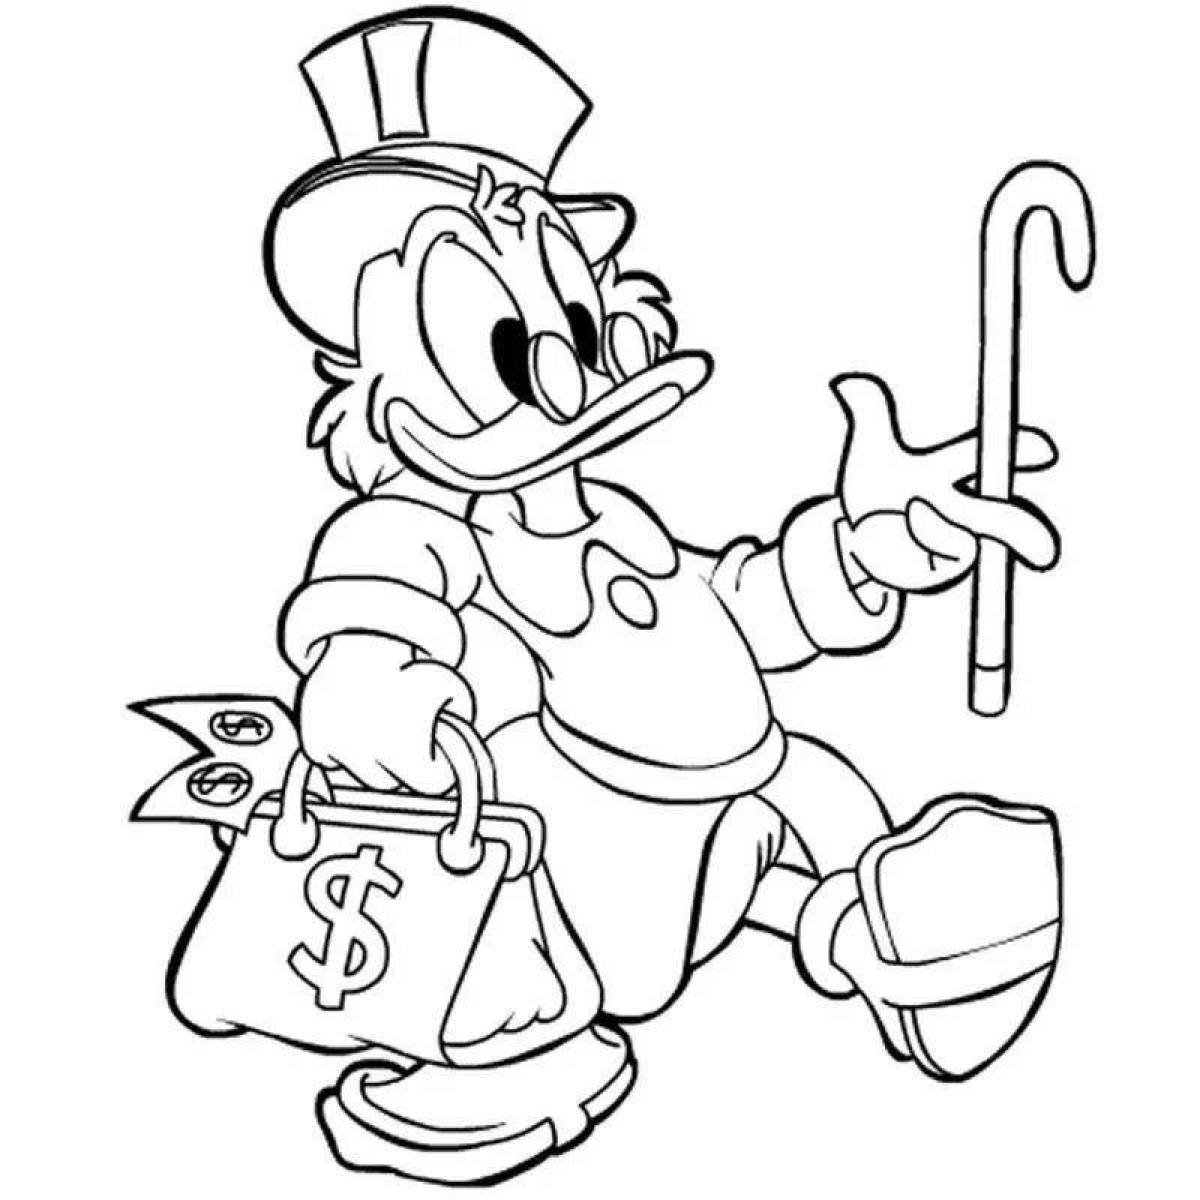 Coloring lively scrooge